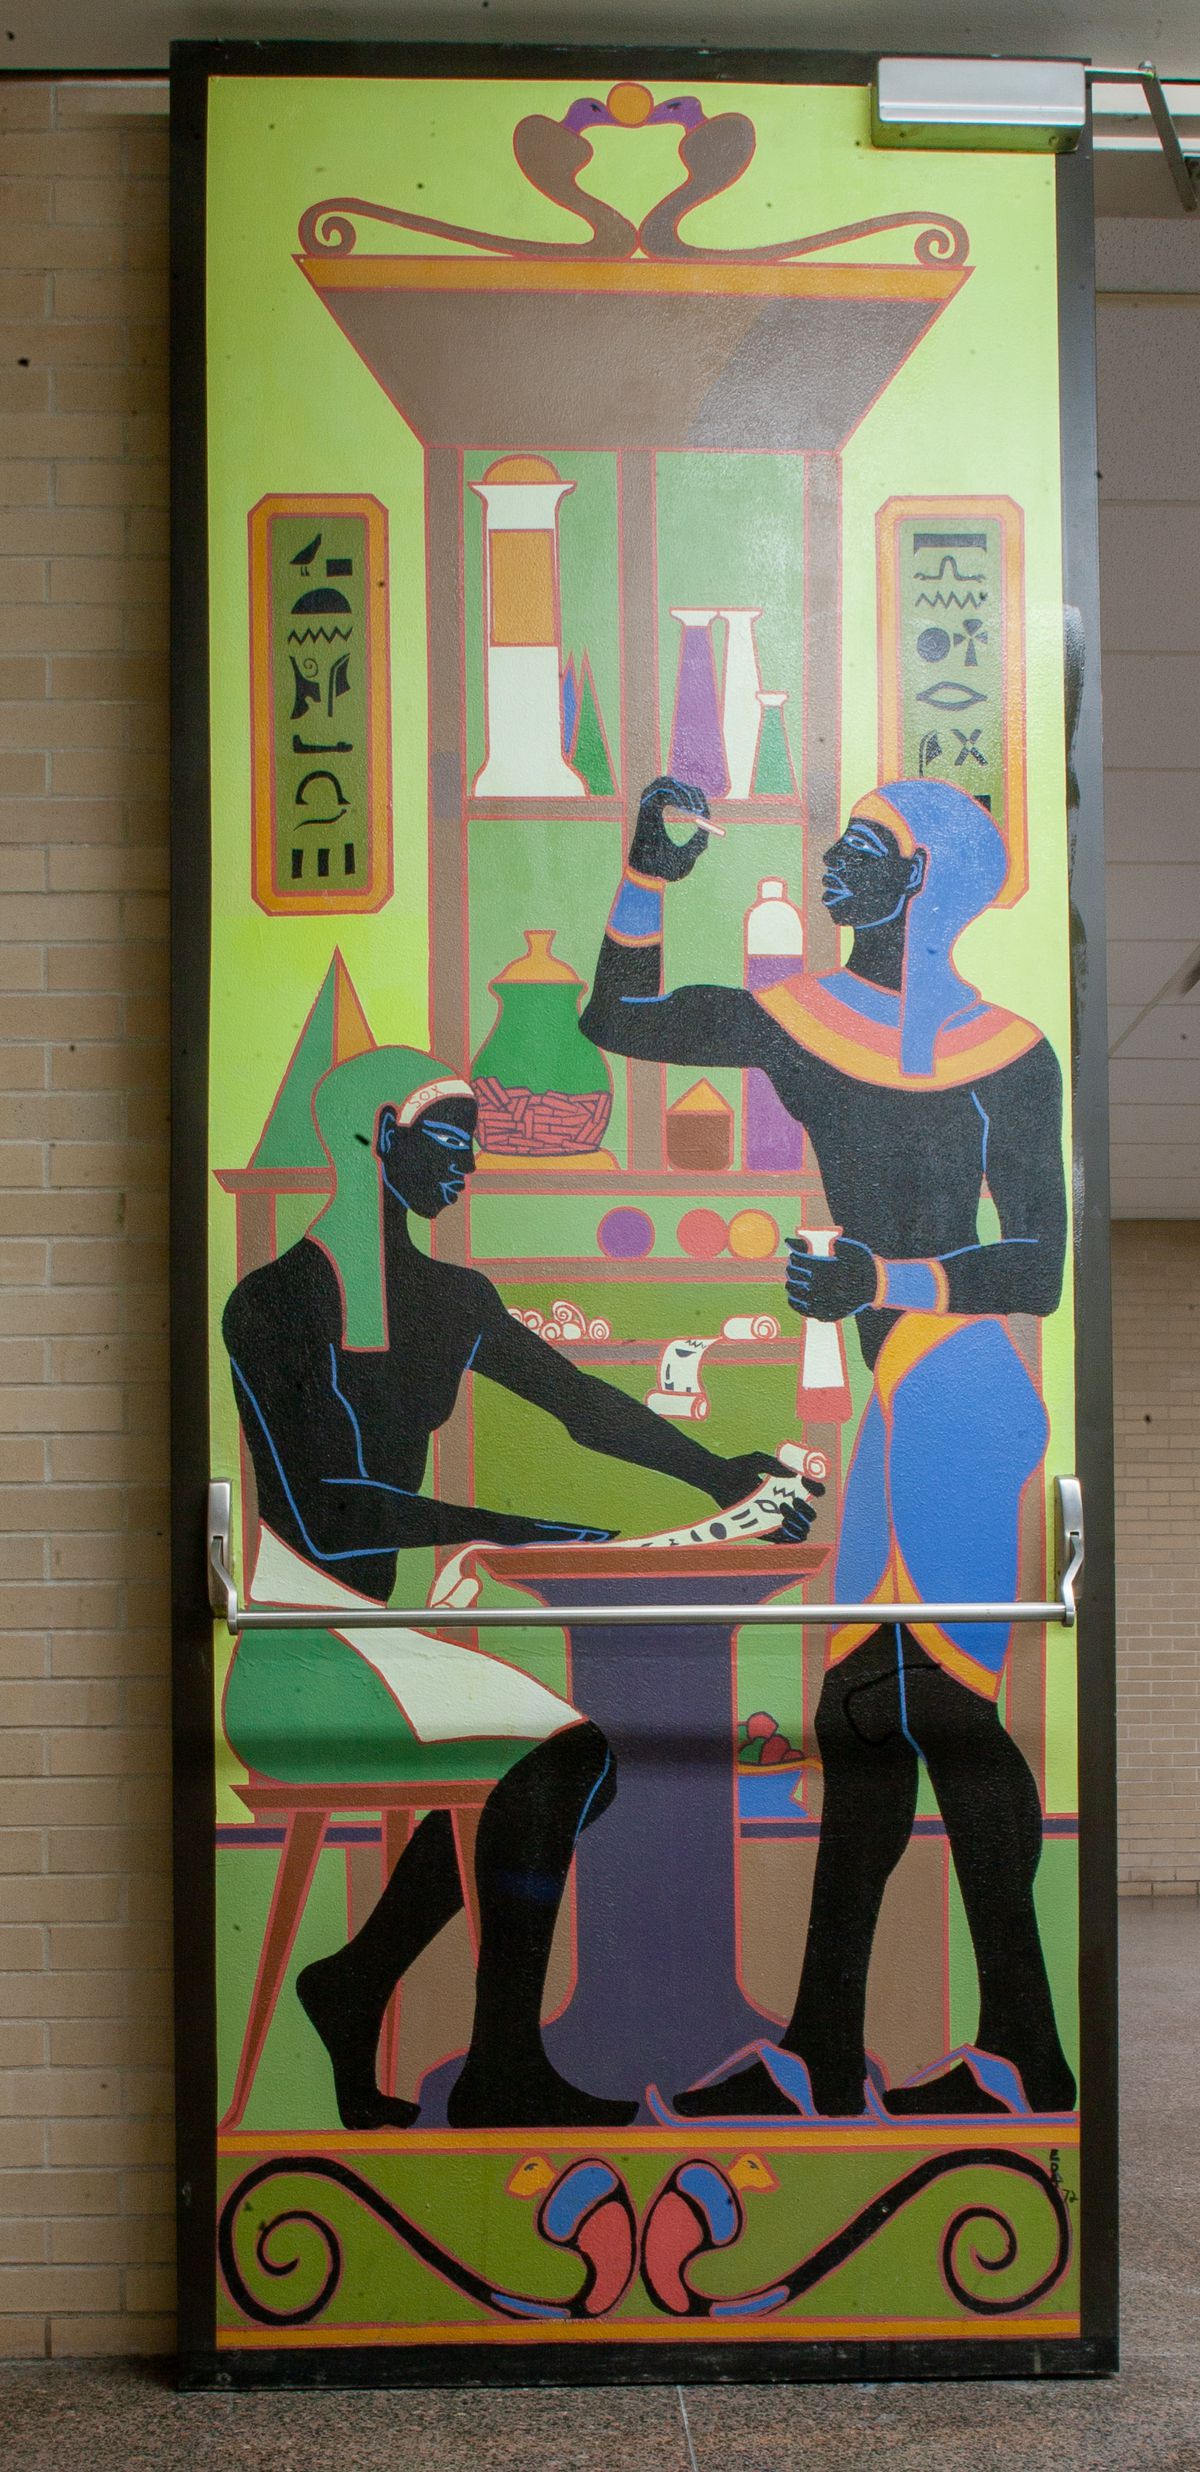 Eugene “Eda” Wade painted designs that transformed the steel fire doors at Malcolm X College.